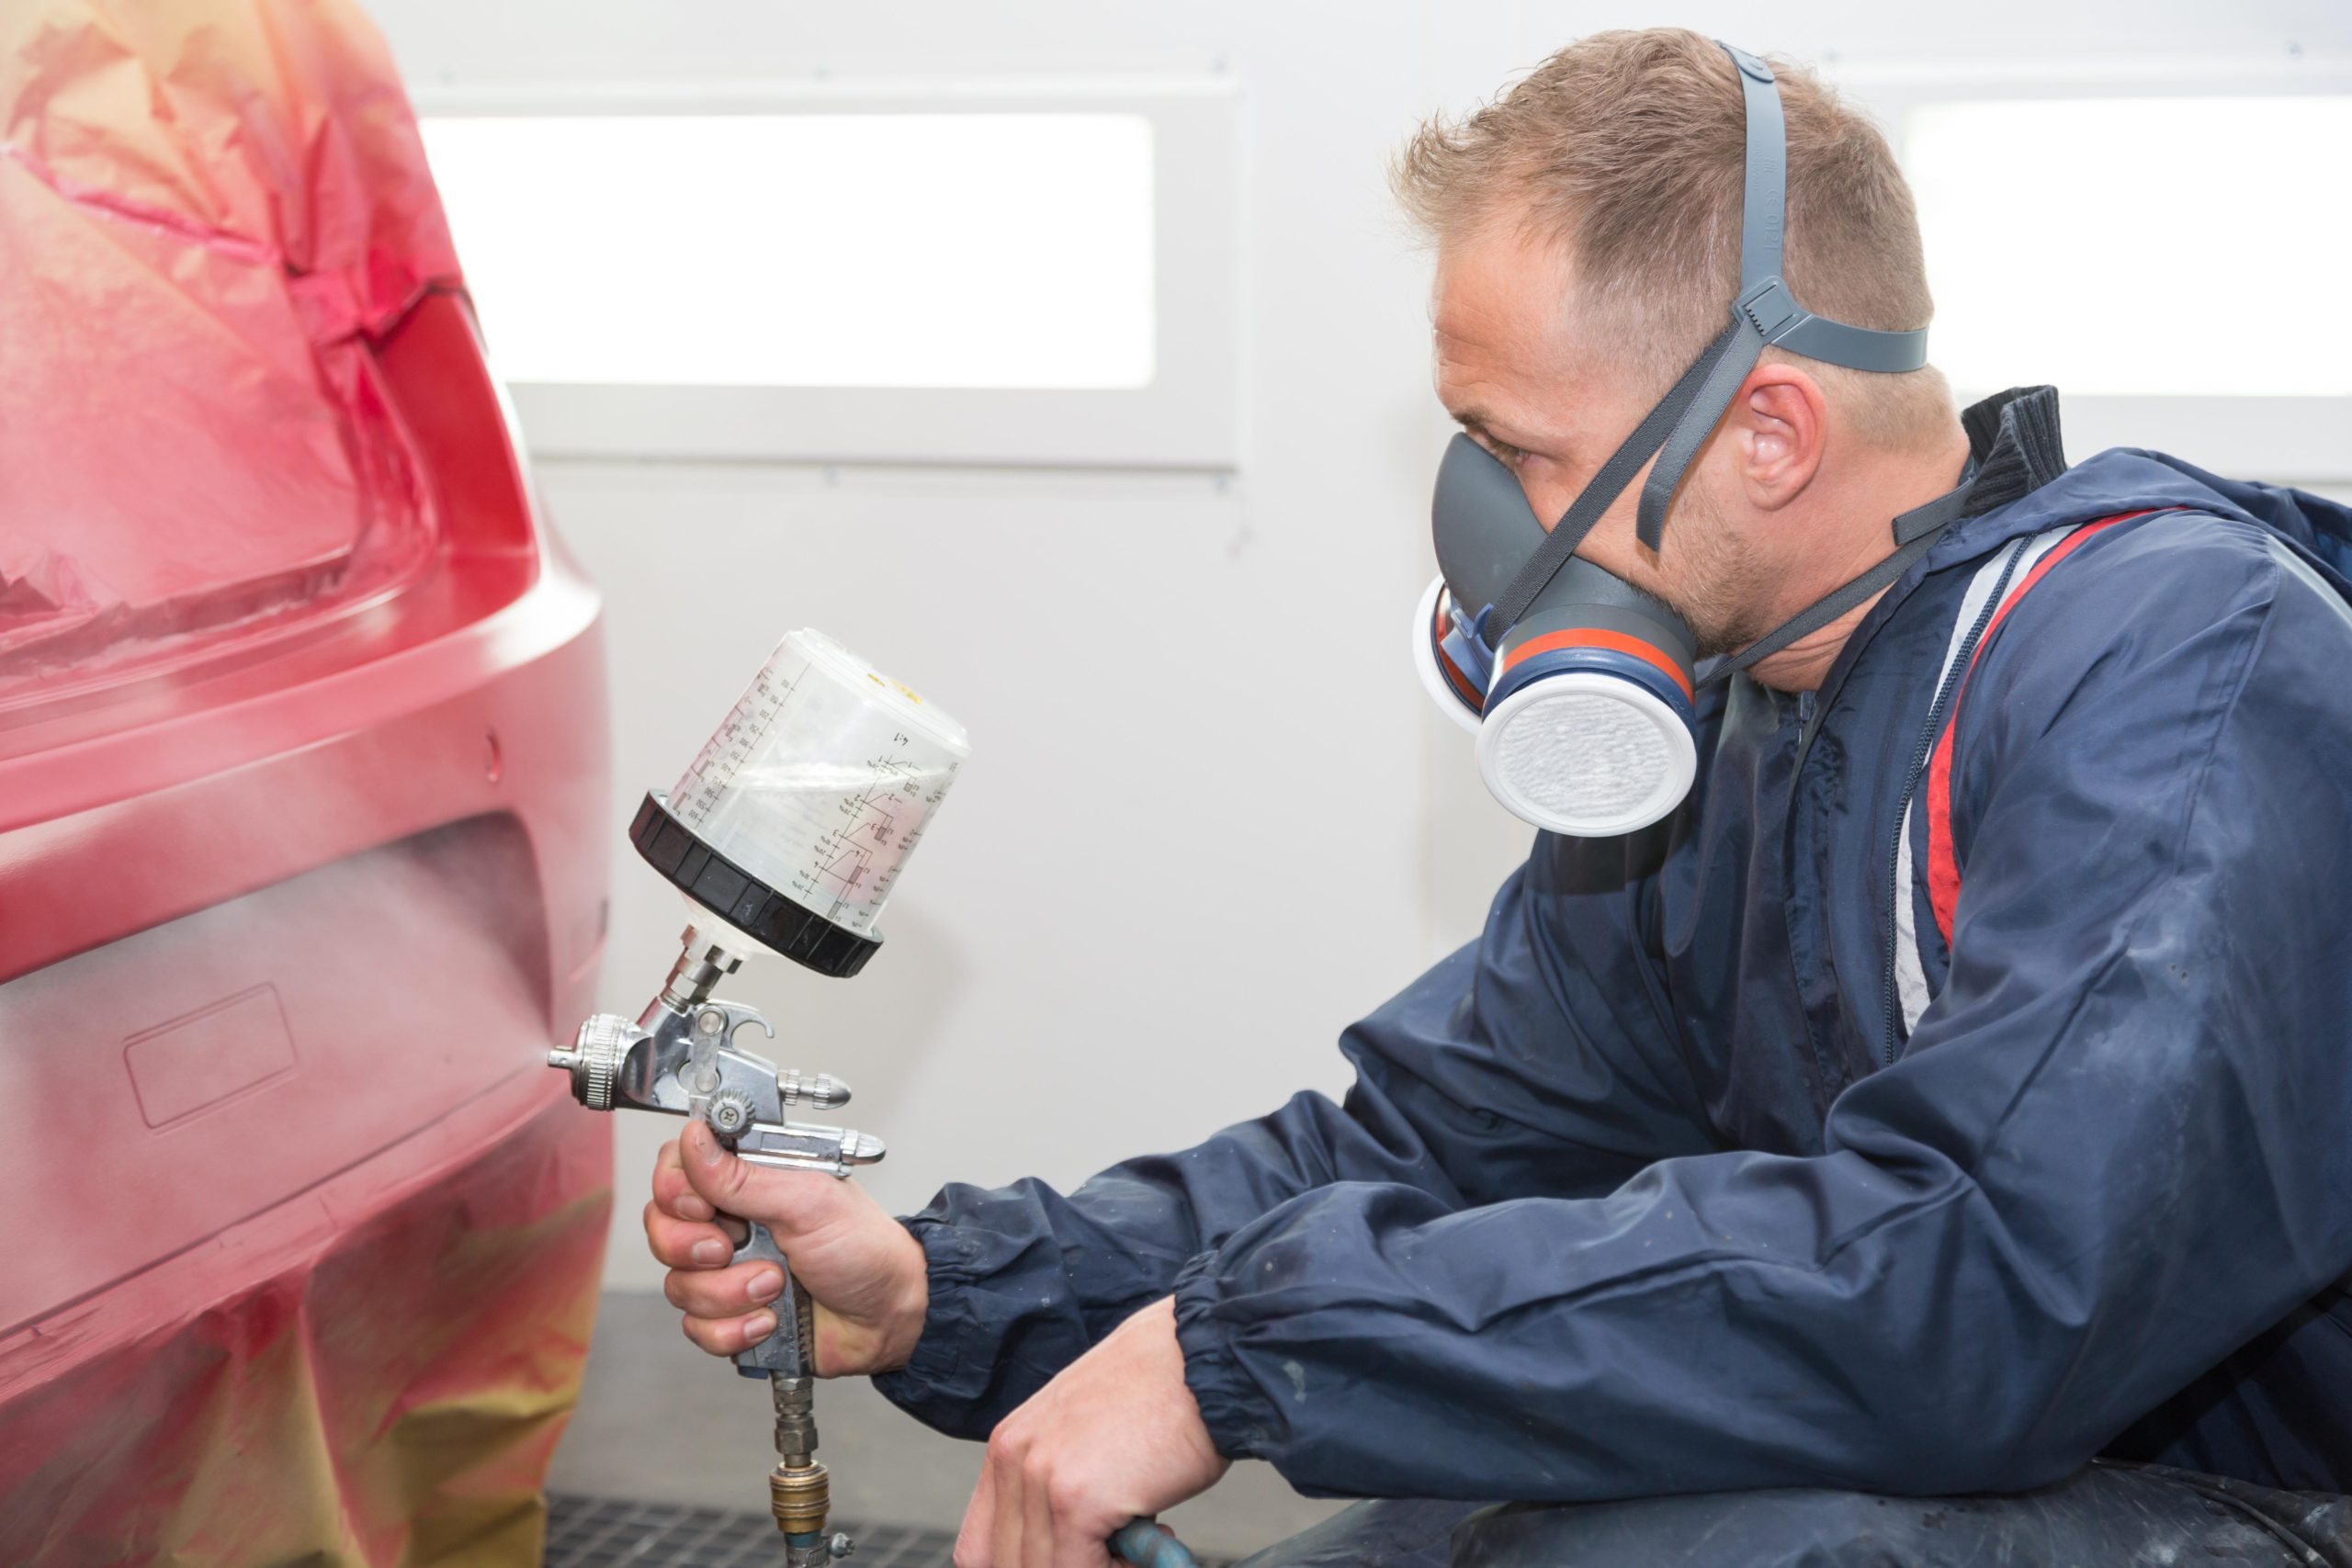 How to Find Quality Auto Body & Paint Repair Centers Nearby You?